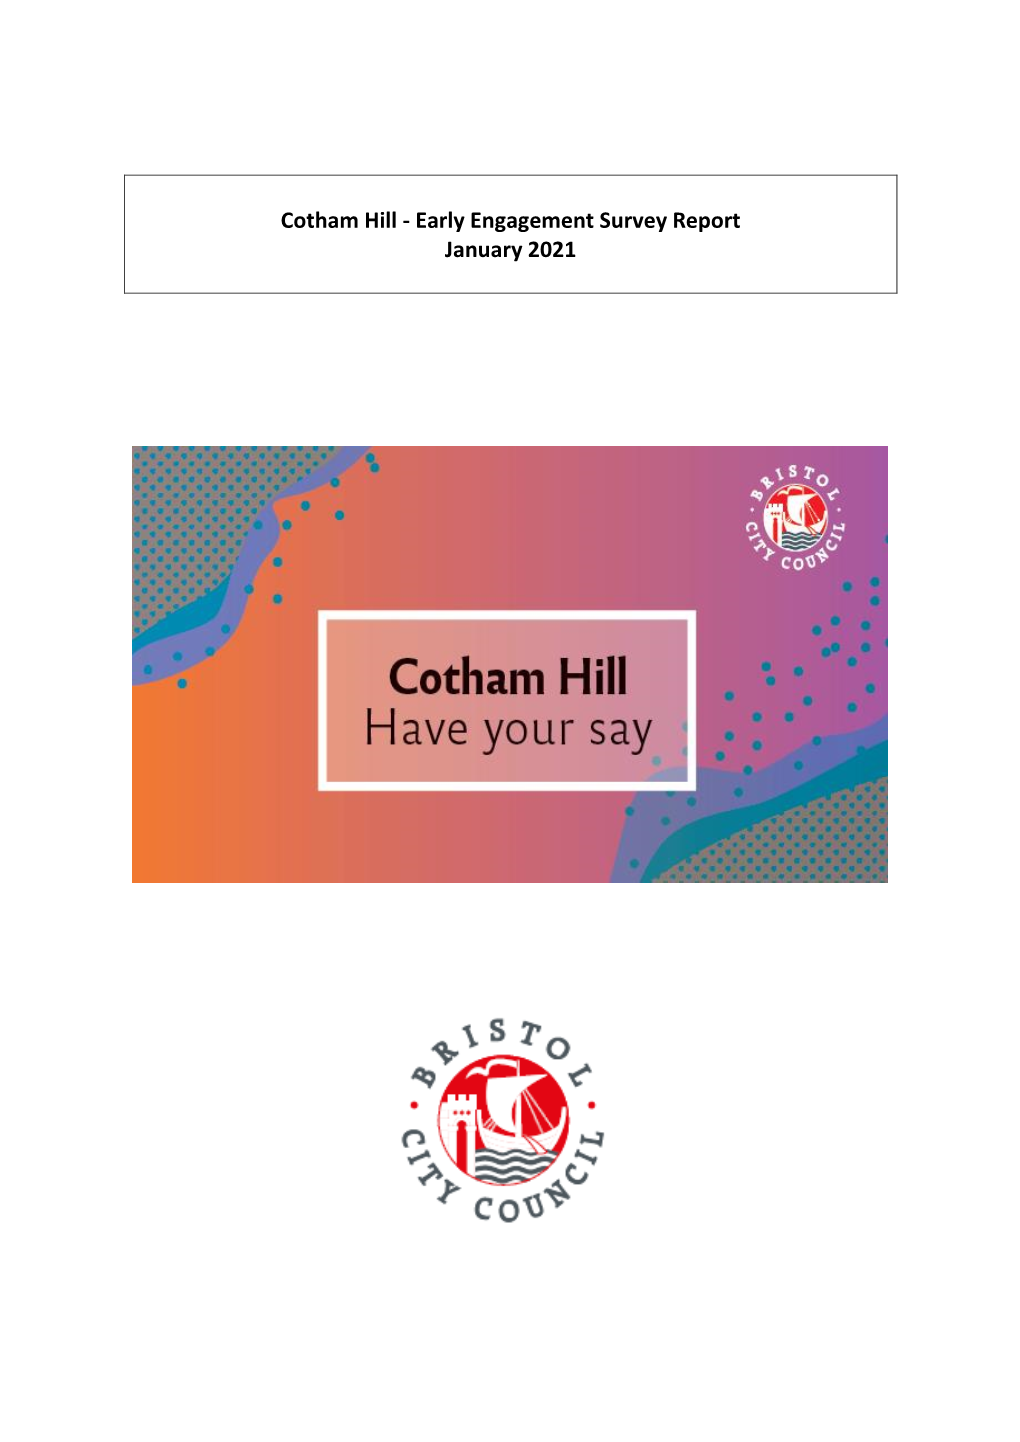 Cotham Hill - Early Engagement Survey Report January 2021